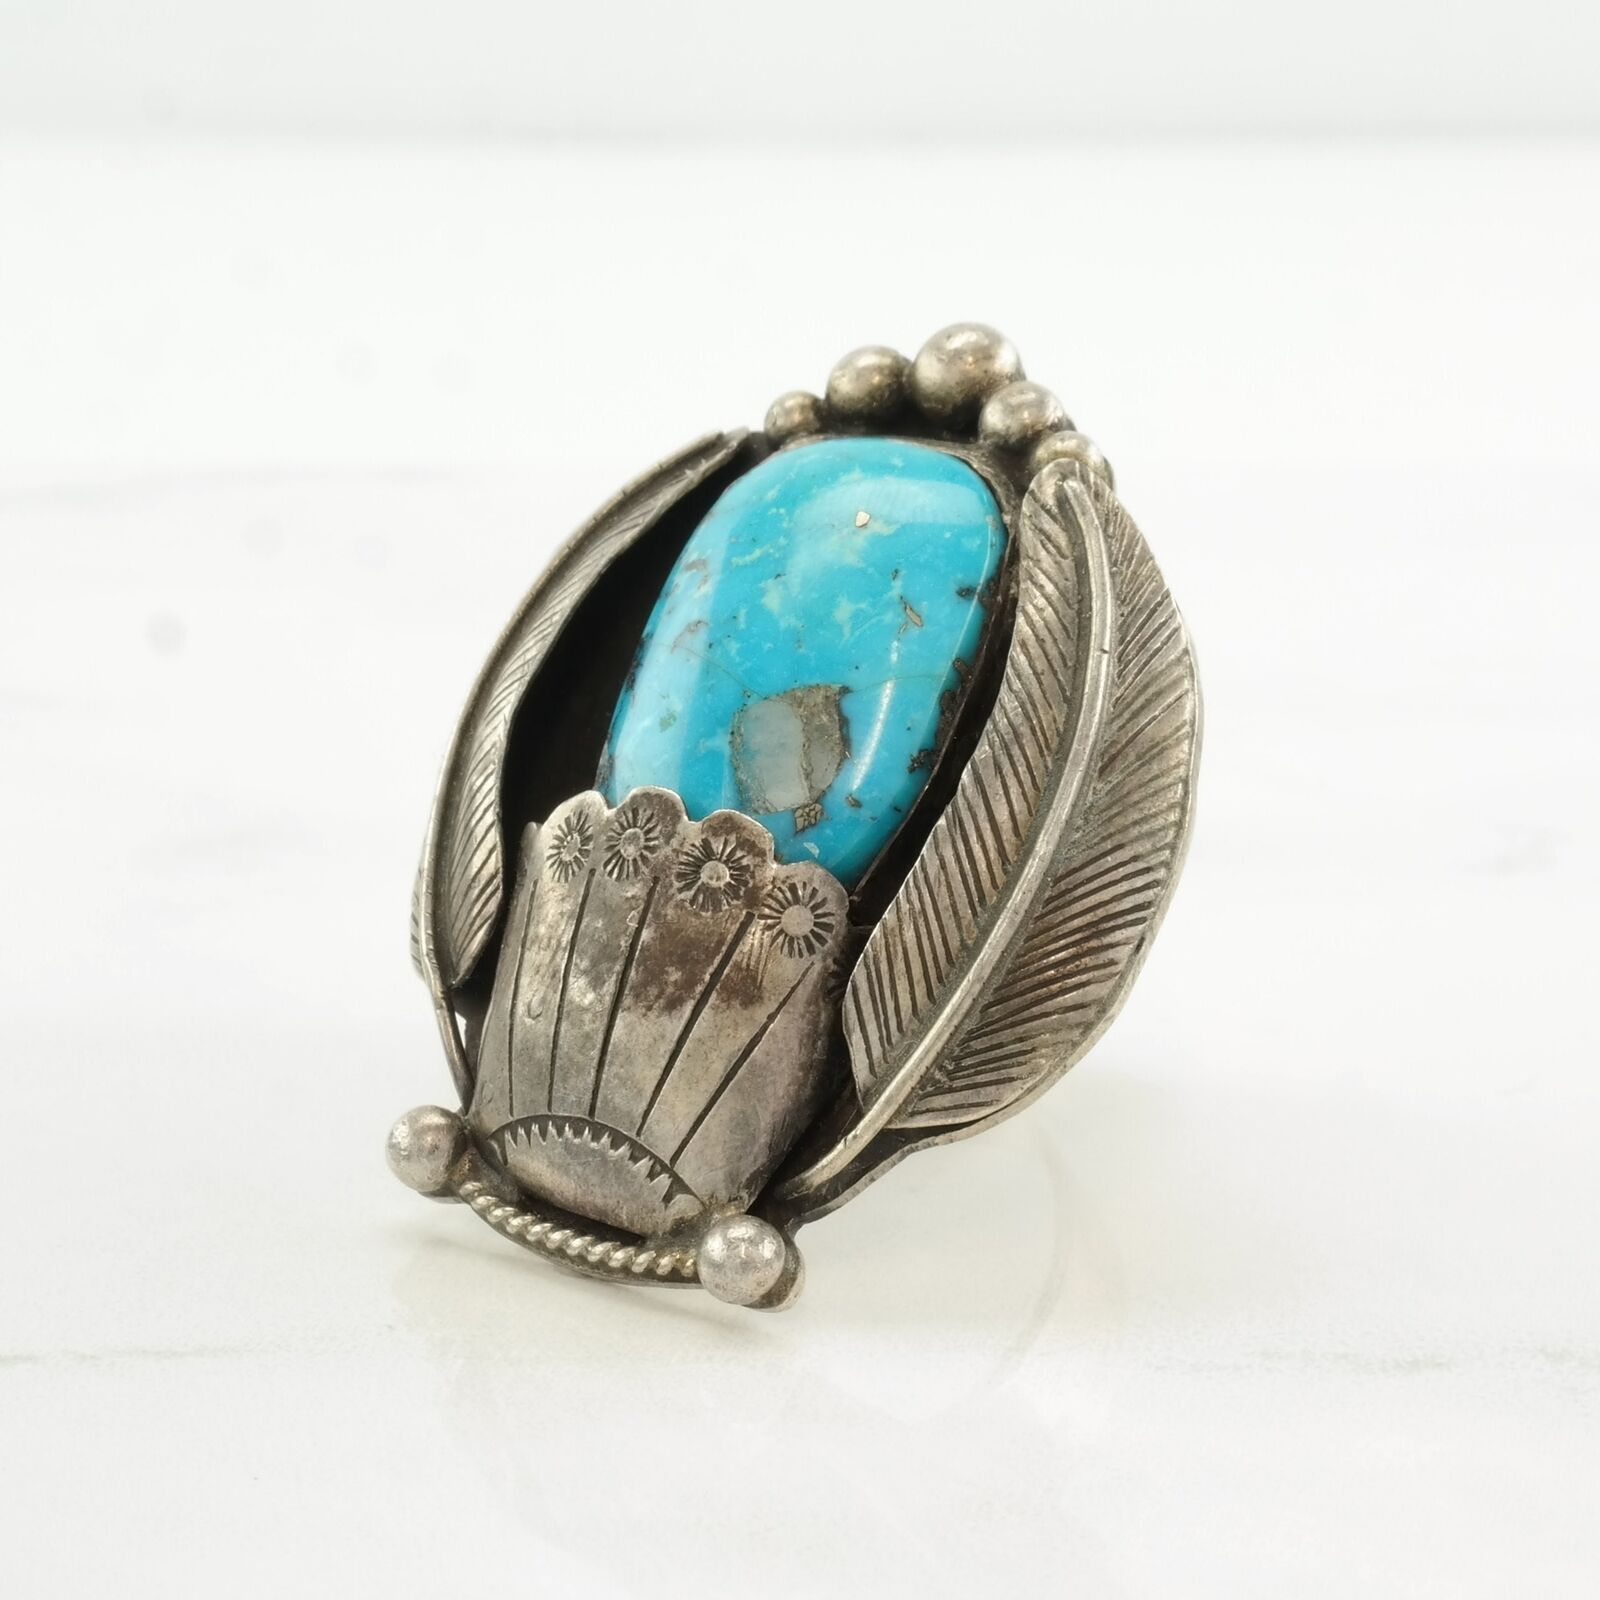 Vintage Native American Silver Ring Turquoise Feather, Stamped Sterling Size 7